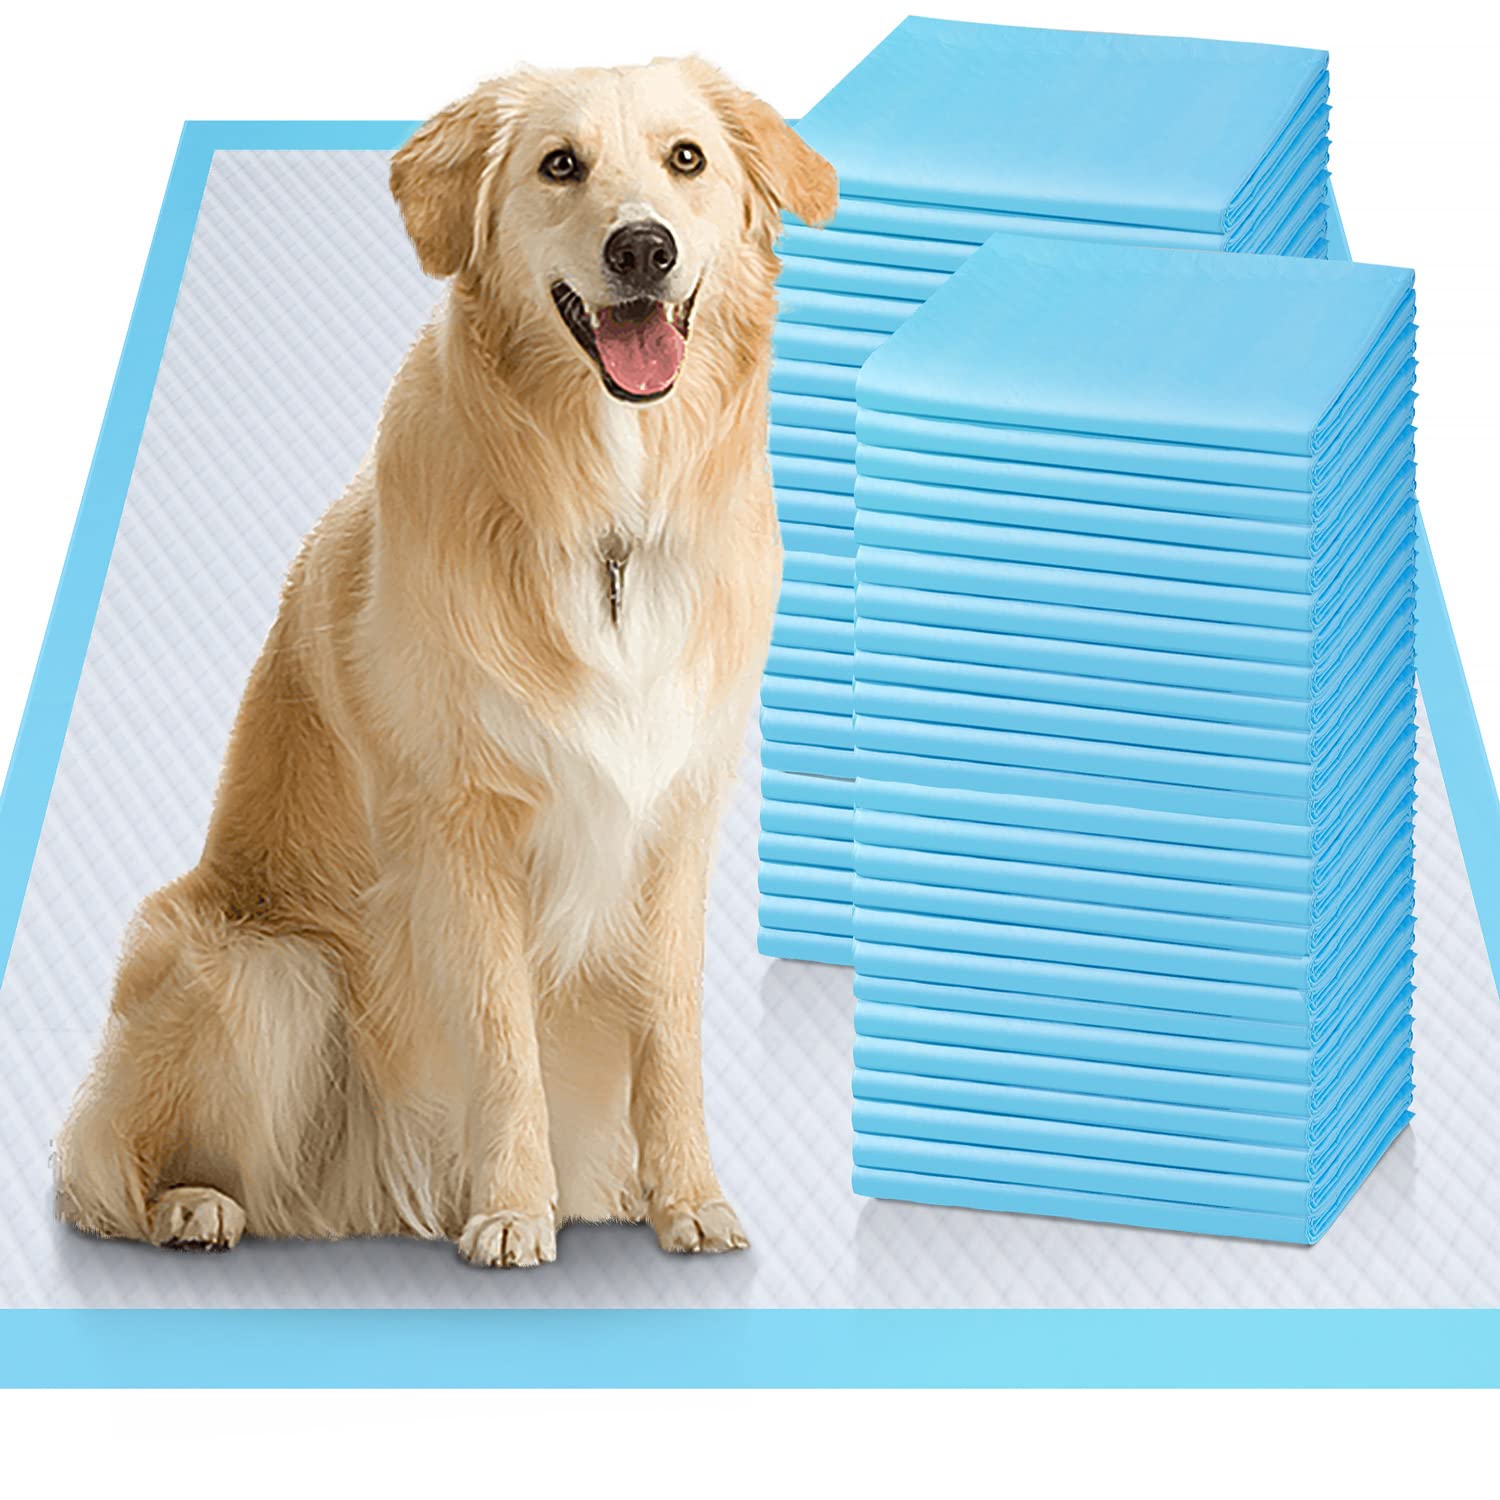 Are These The Best Dog Potty Pads: How 500 23x36 Puppy Pads Changed My Life